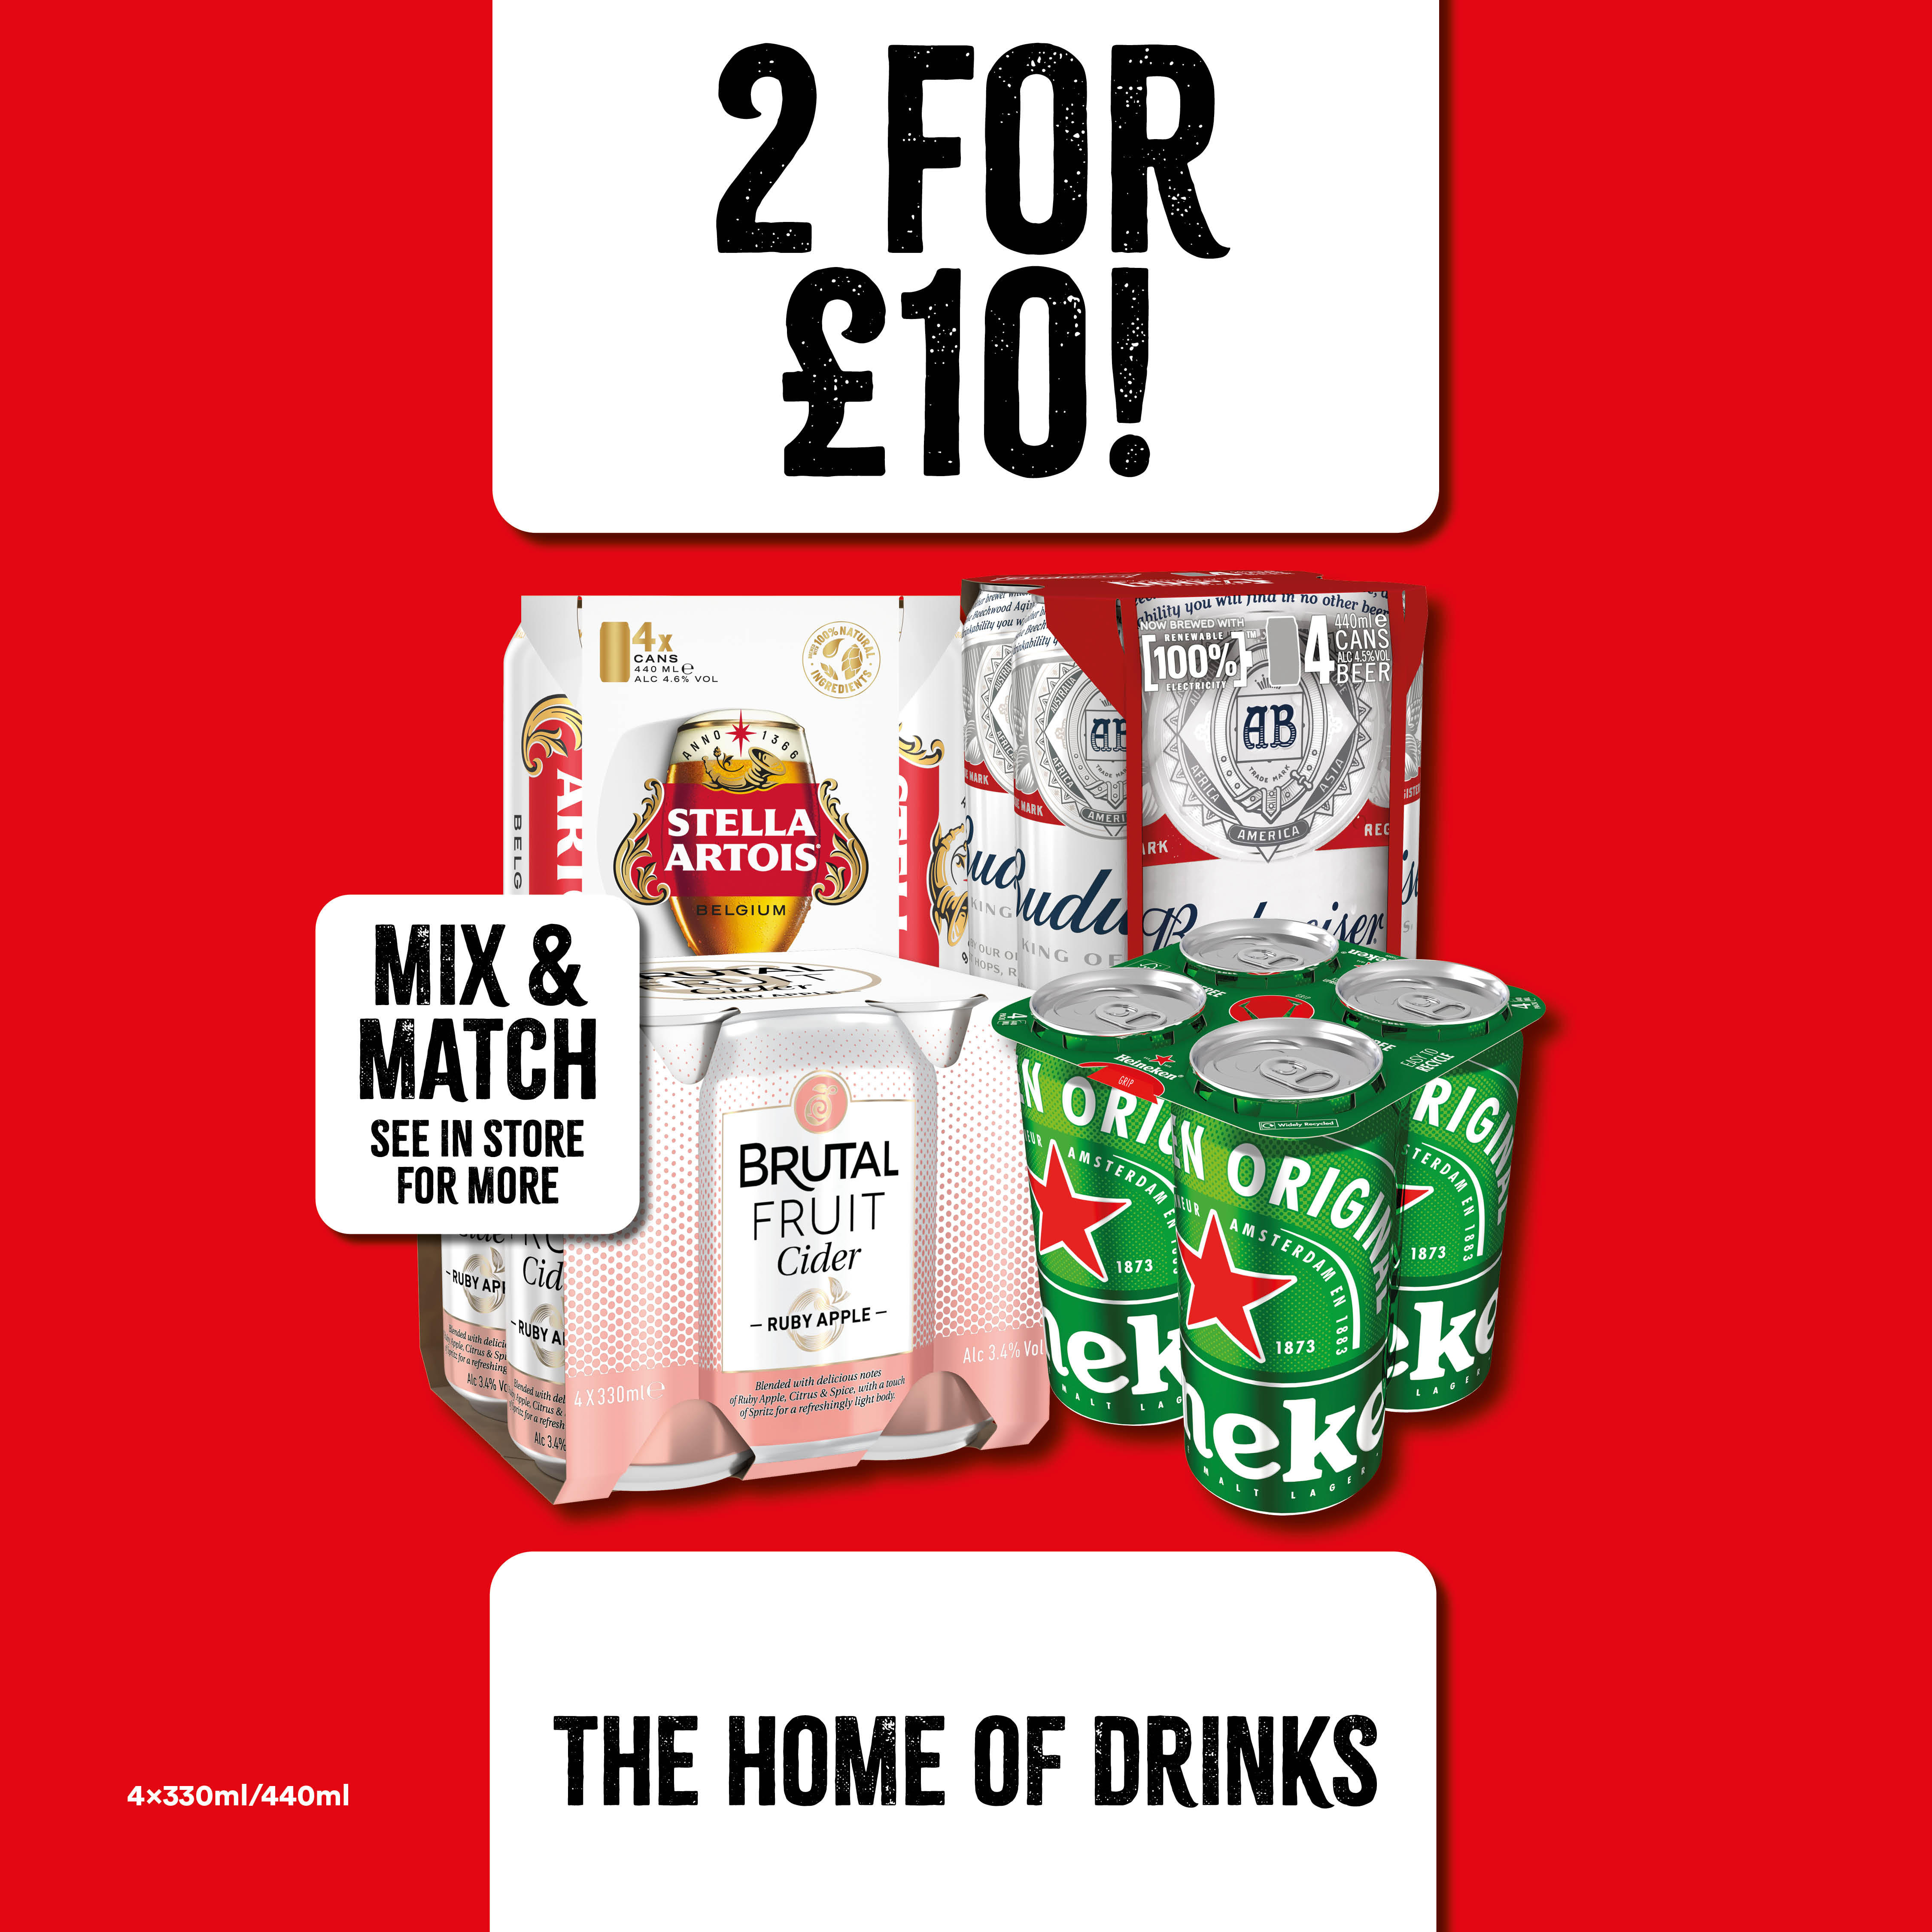 2 for £10 on 4 pack beers and cider Bargain Booze Newport Pagnell 01908 612653